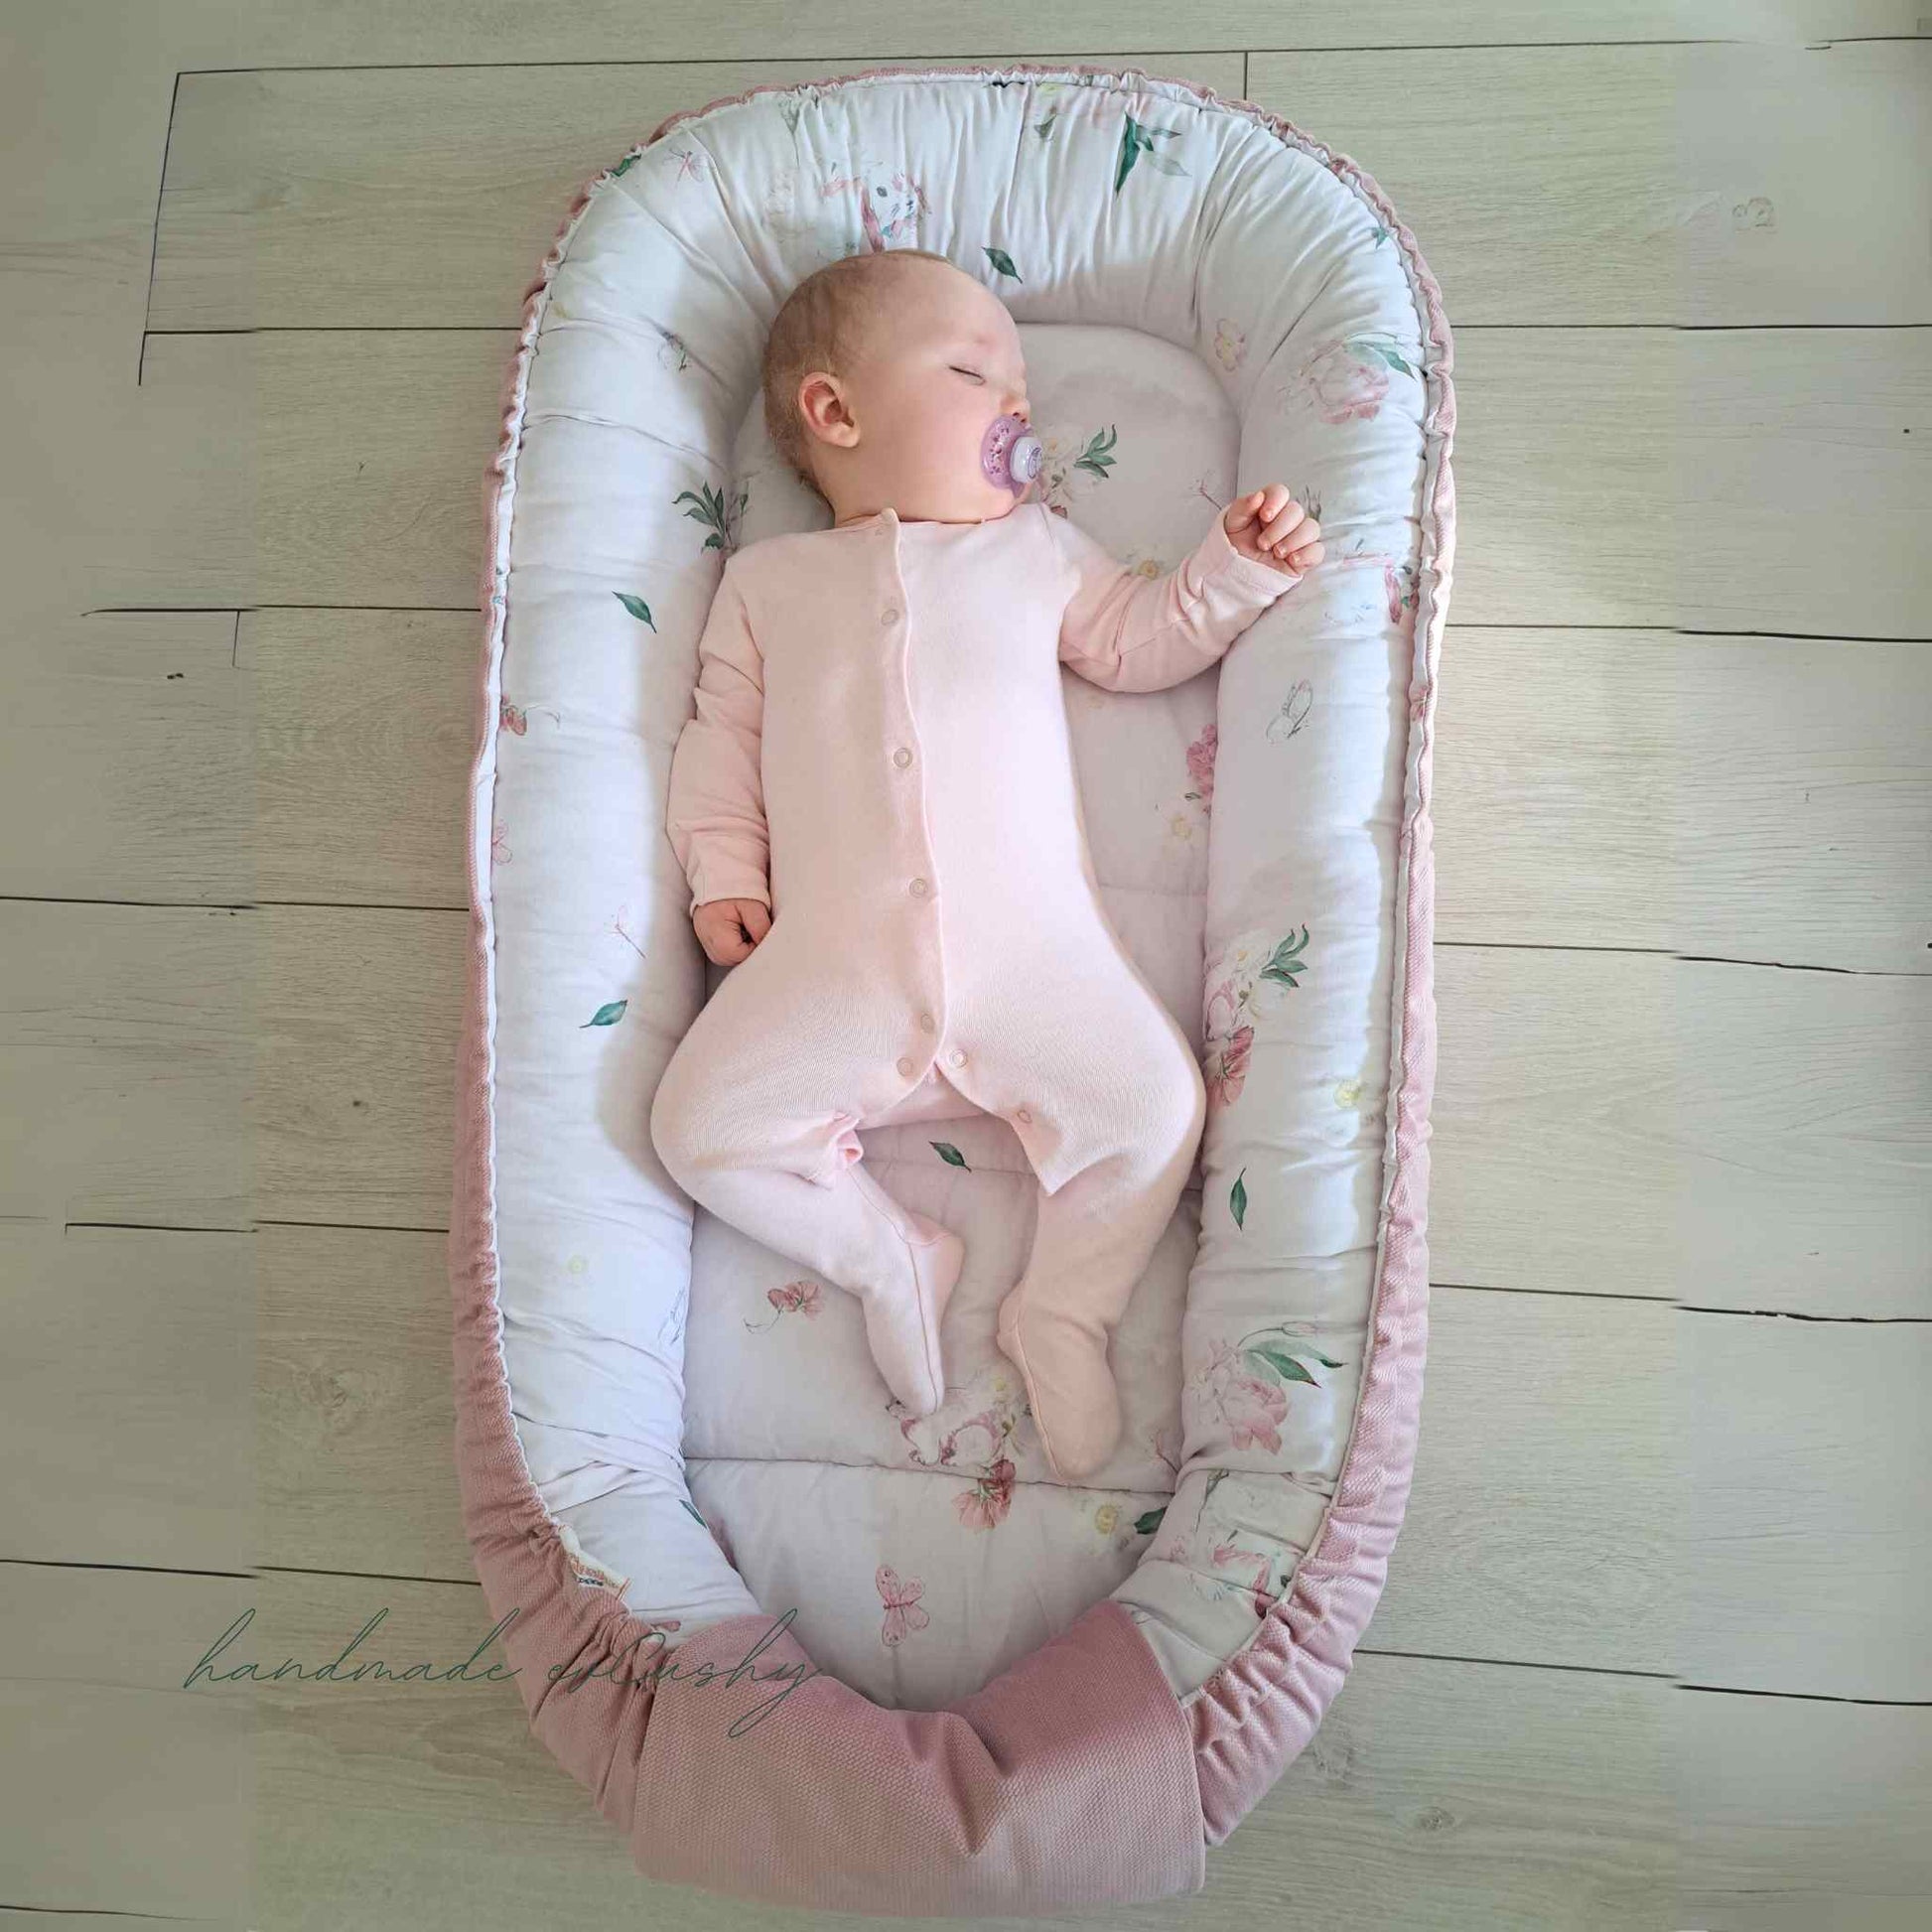 baby nest for bigger children xxl size for toddlers 6 months plus pink with bunnies